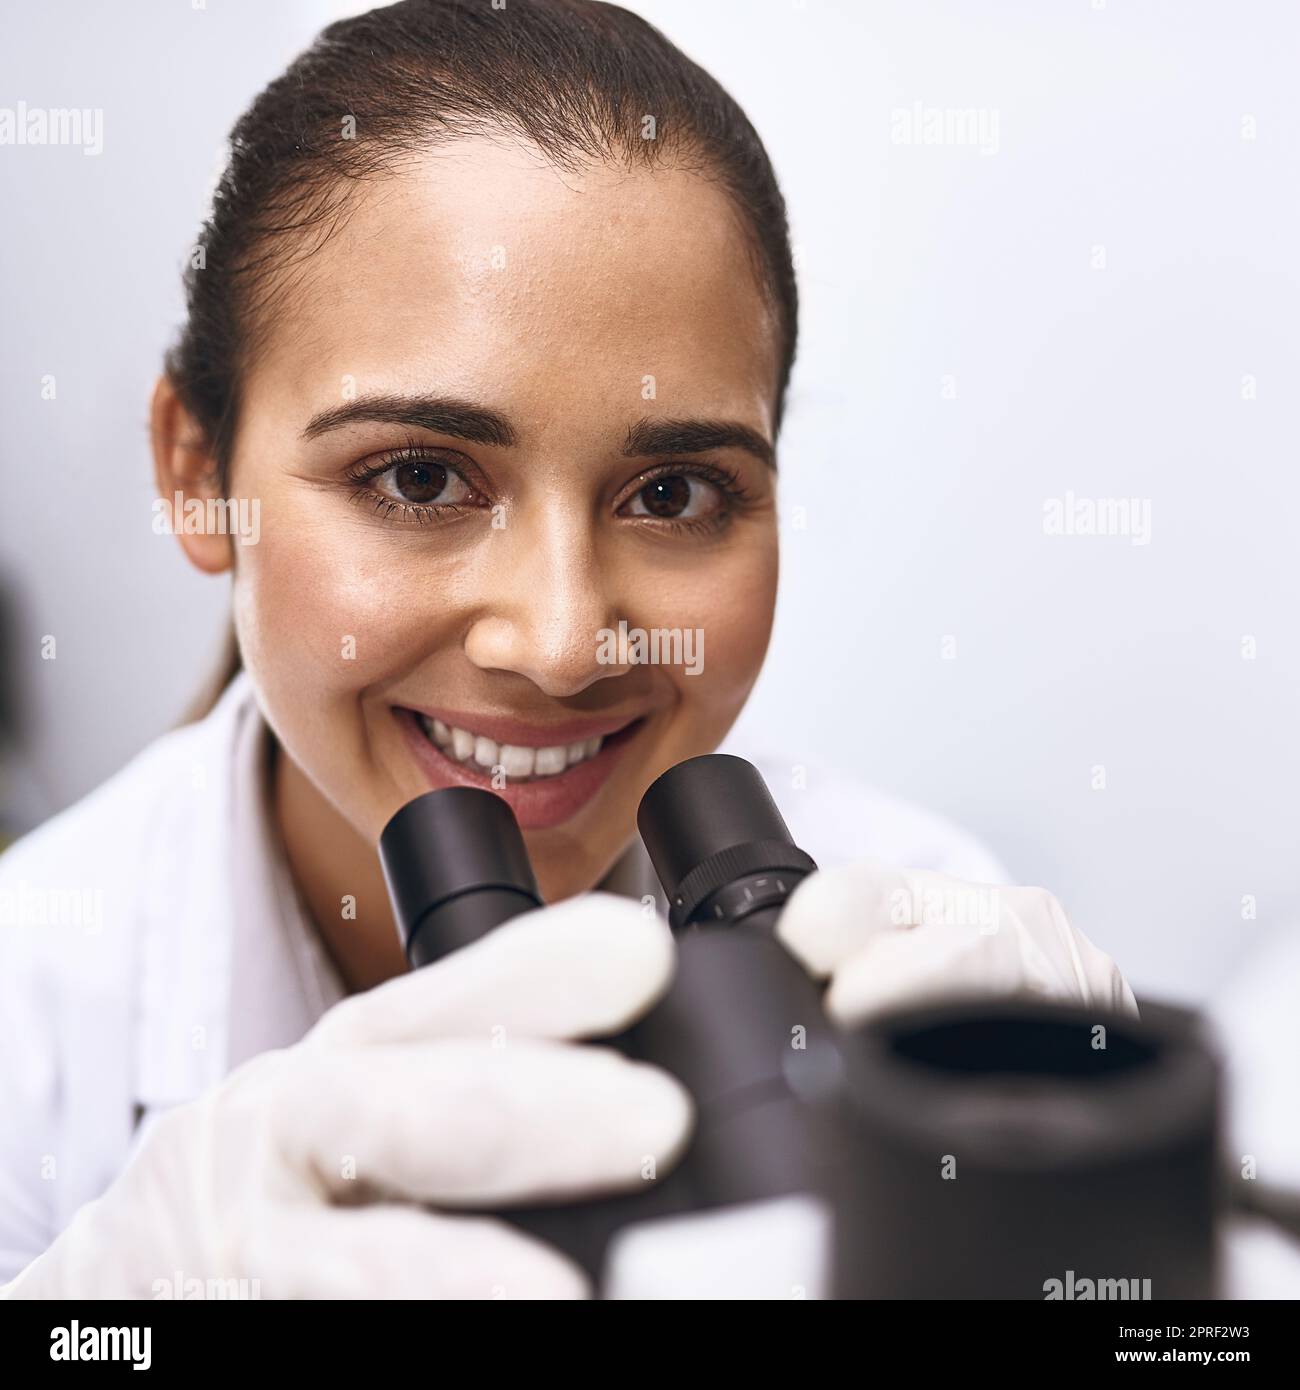 Theres always so much to discover. Portrait of a young scientist using a microscope in a lab. Stock Photo